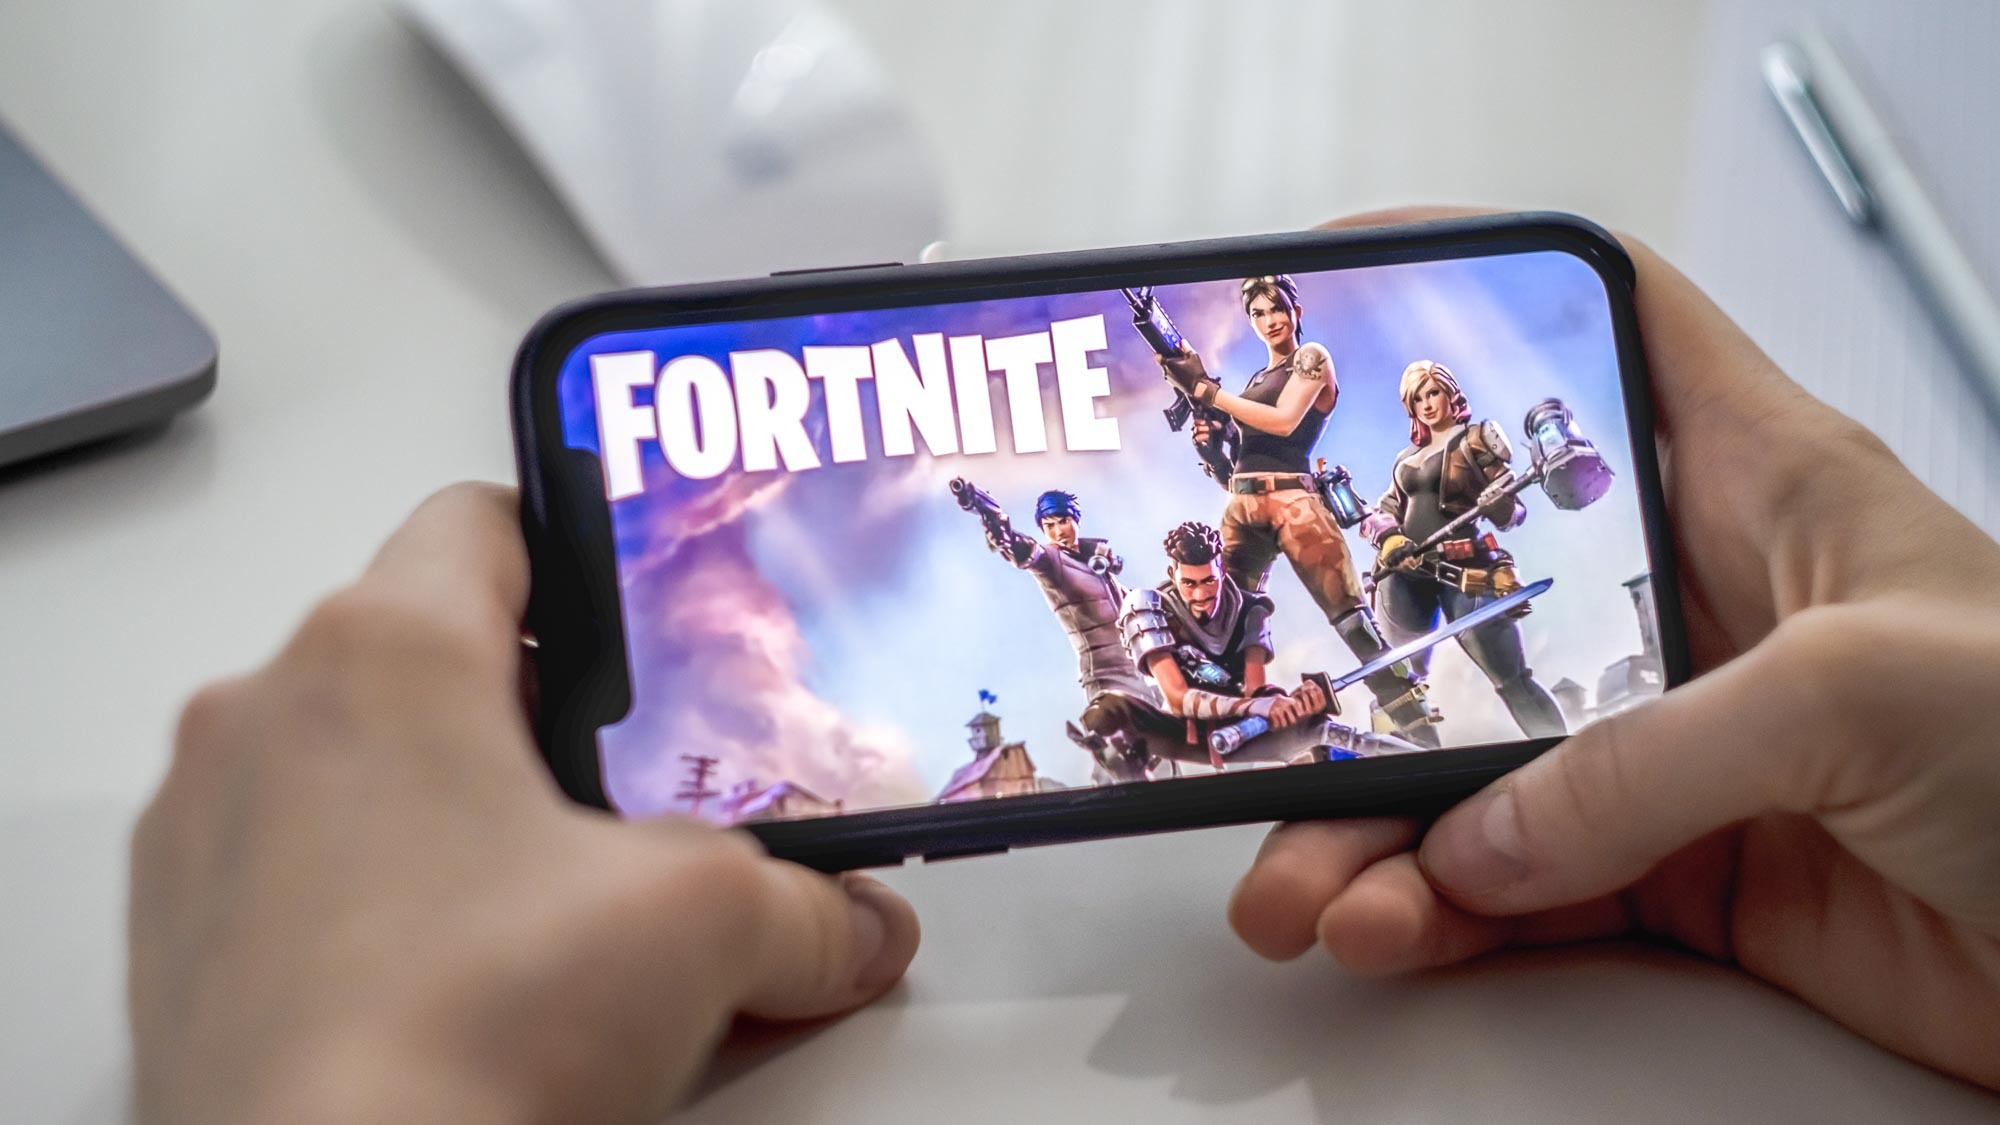 Fortnite is going to return to iPhones as a part of Nvidia's cloud gaming  service GeForce Now